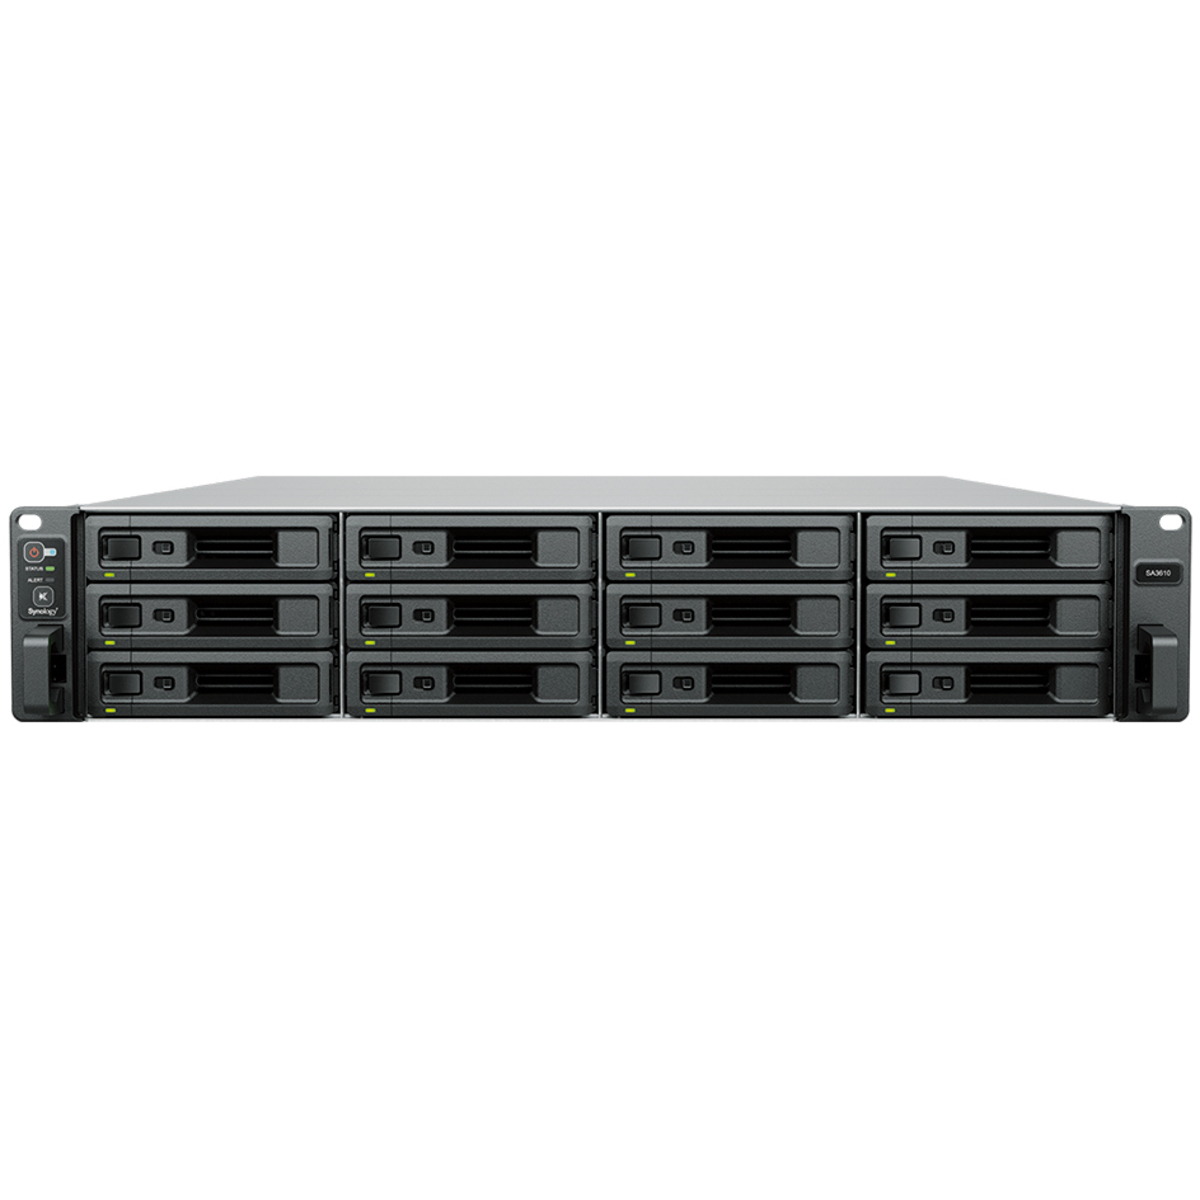 Synology RackStation SA3410 144tb 12-Bay RackMount Large Business / Enterprise NAS - Network Attached Storage Device 9x16tb Seagate IronWolf ST16000VN001 3.5 7200rpm SATA 6Gb/s HDD NAS Class Drives Installed - Burn-In Tested RackStation SA3410